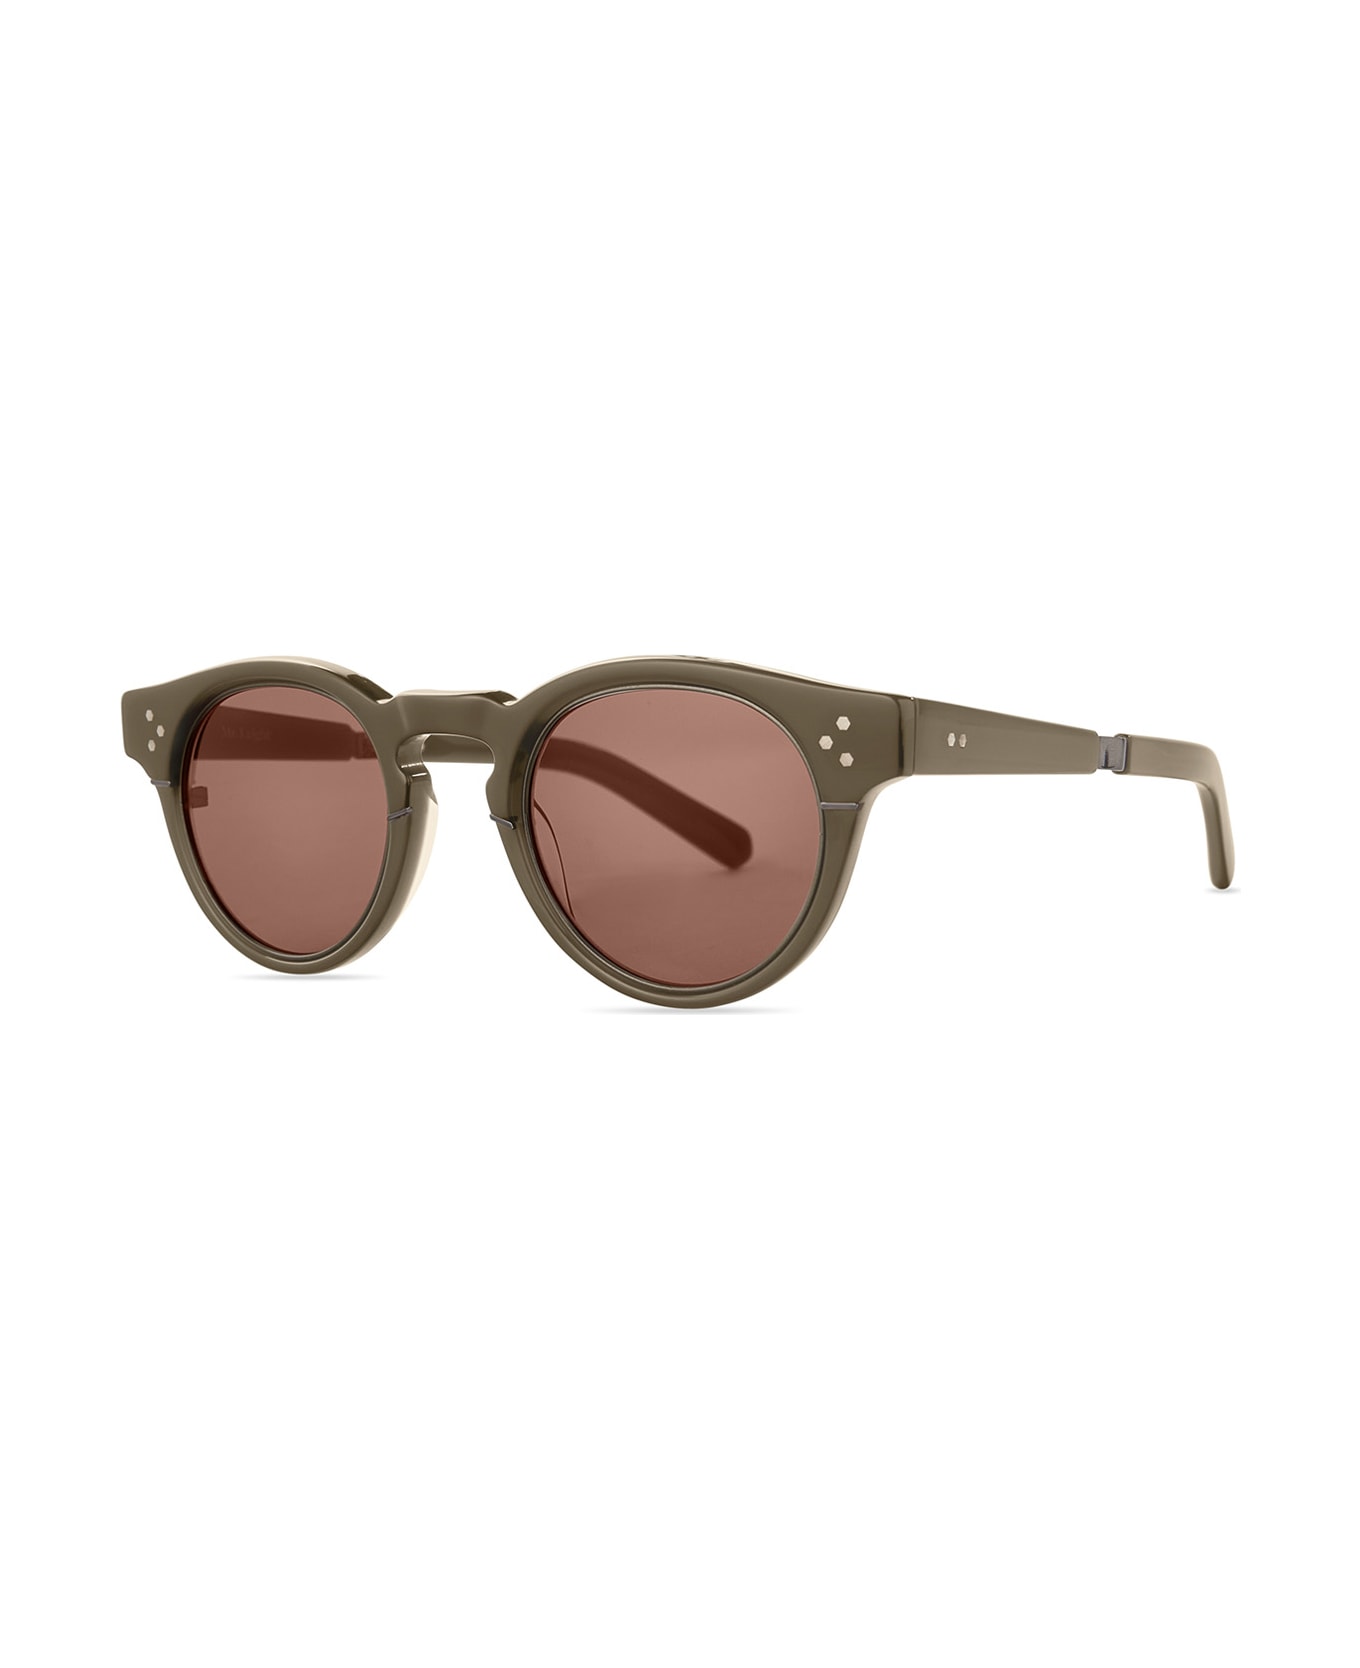 Mr. Leight Kennedy S Citrine-chocolate Gold/orchid Sunglasses - Citrine-Chocolate Gold/Orchid